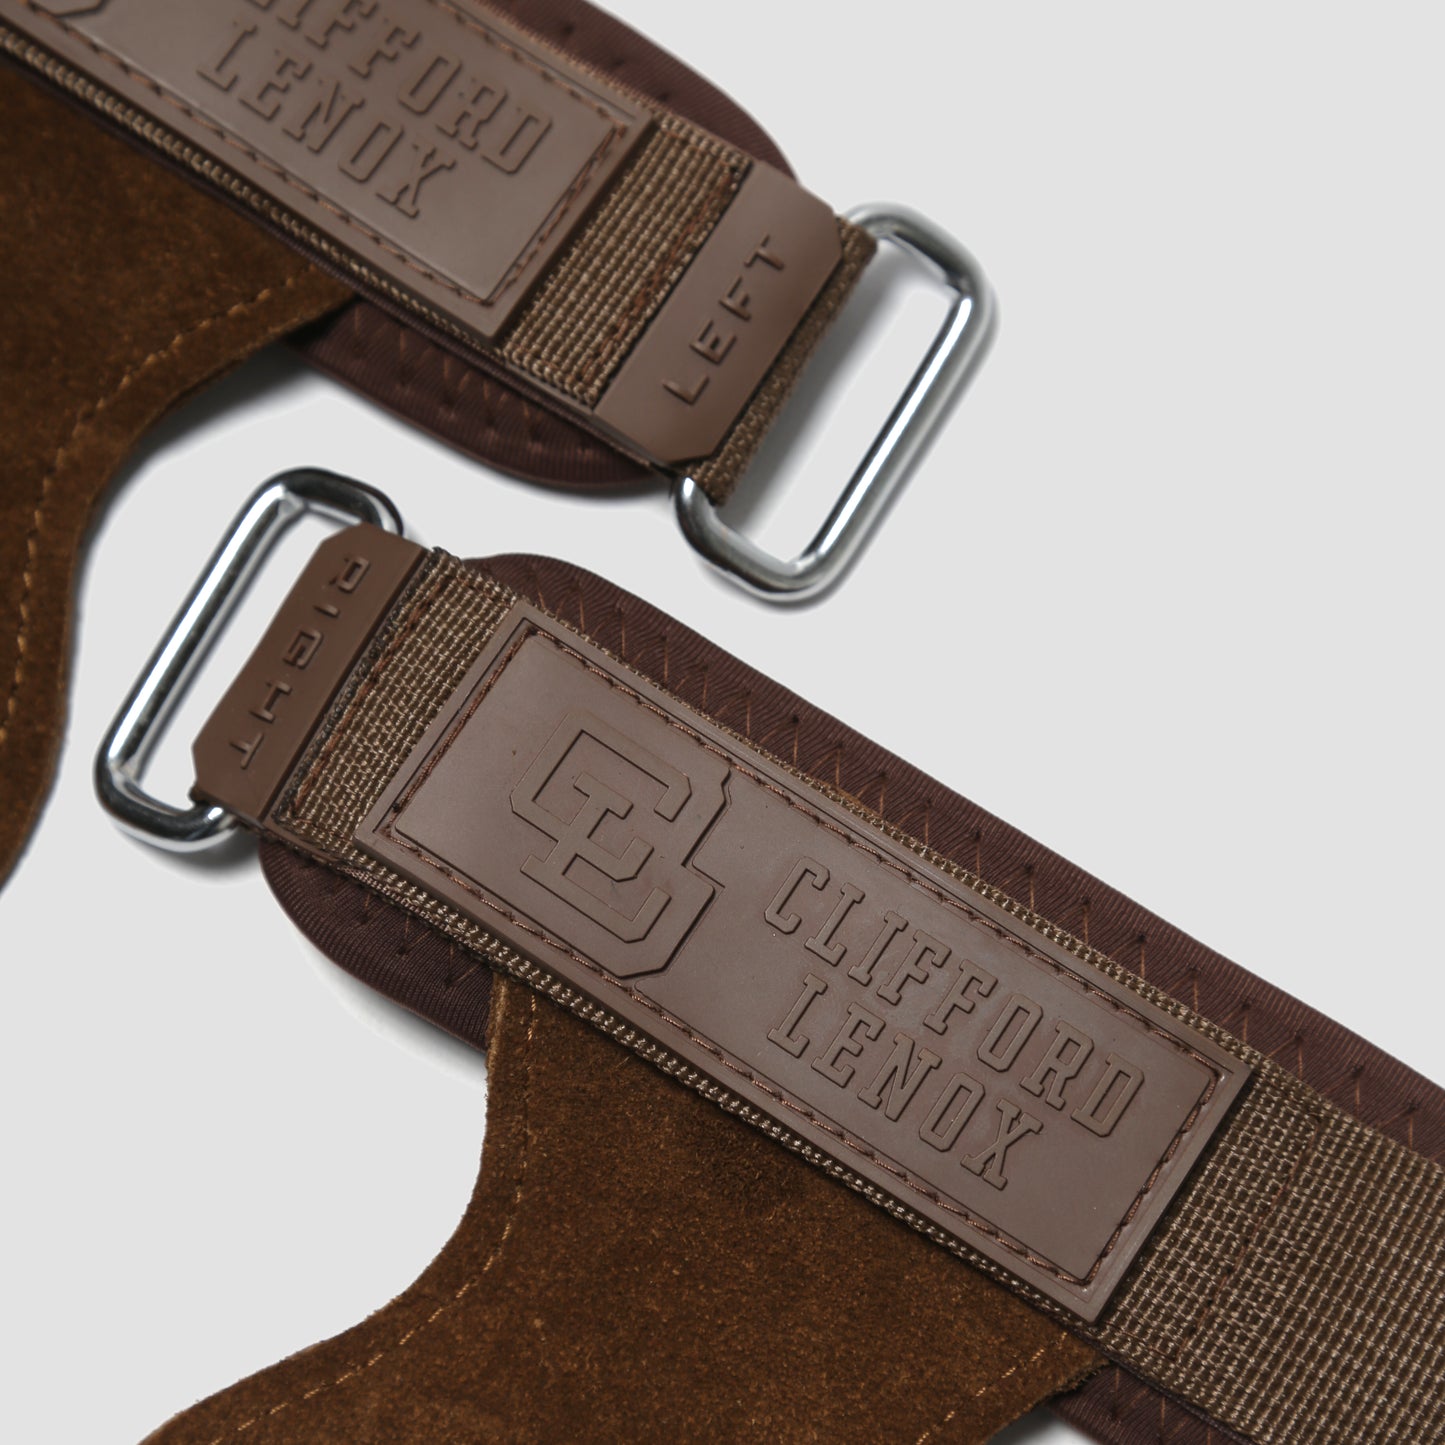 Leather Lifting Grip Wraps // Brown Leather